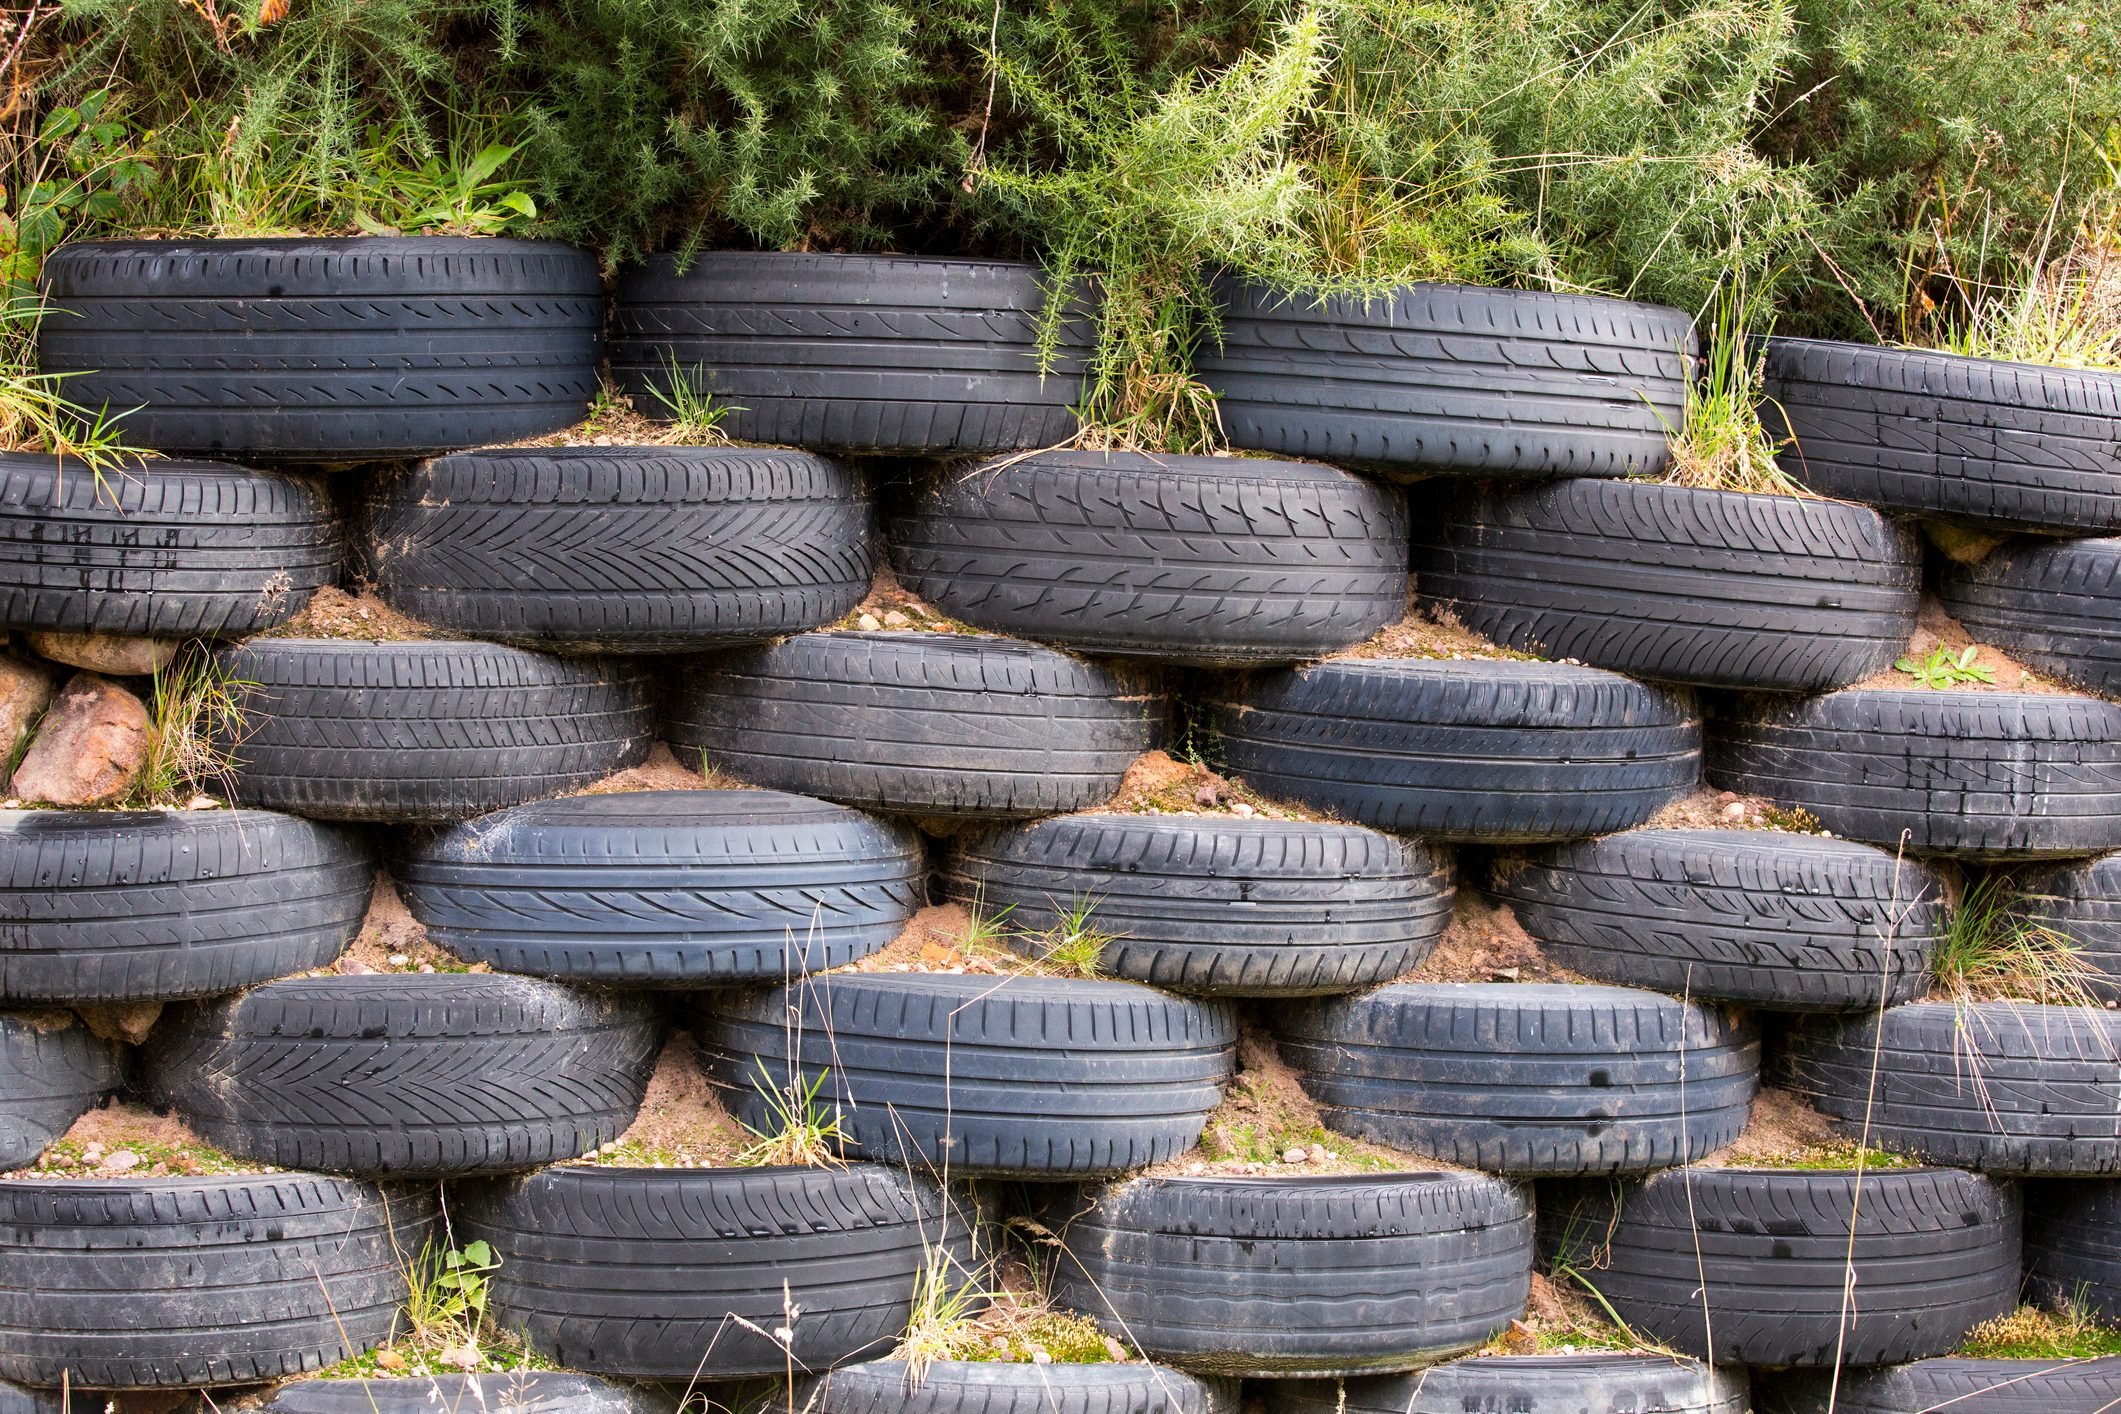 reusing used tires as a wall